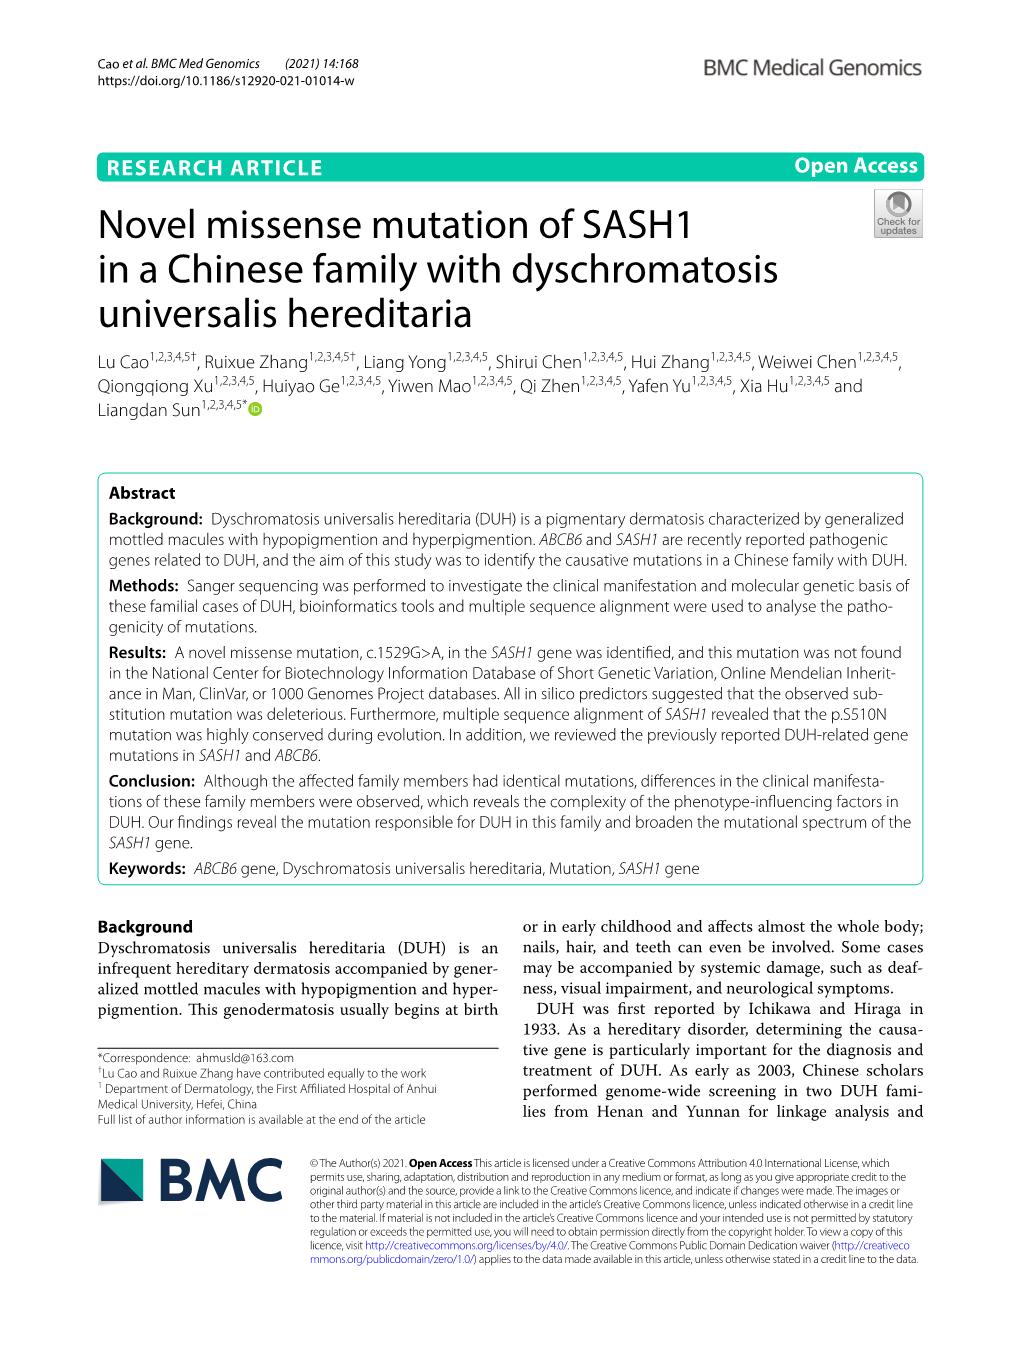 Novel Missense Mutation of SASH1 in a Chinese Family With